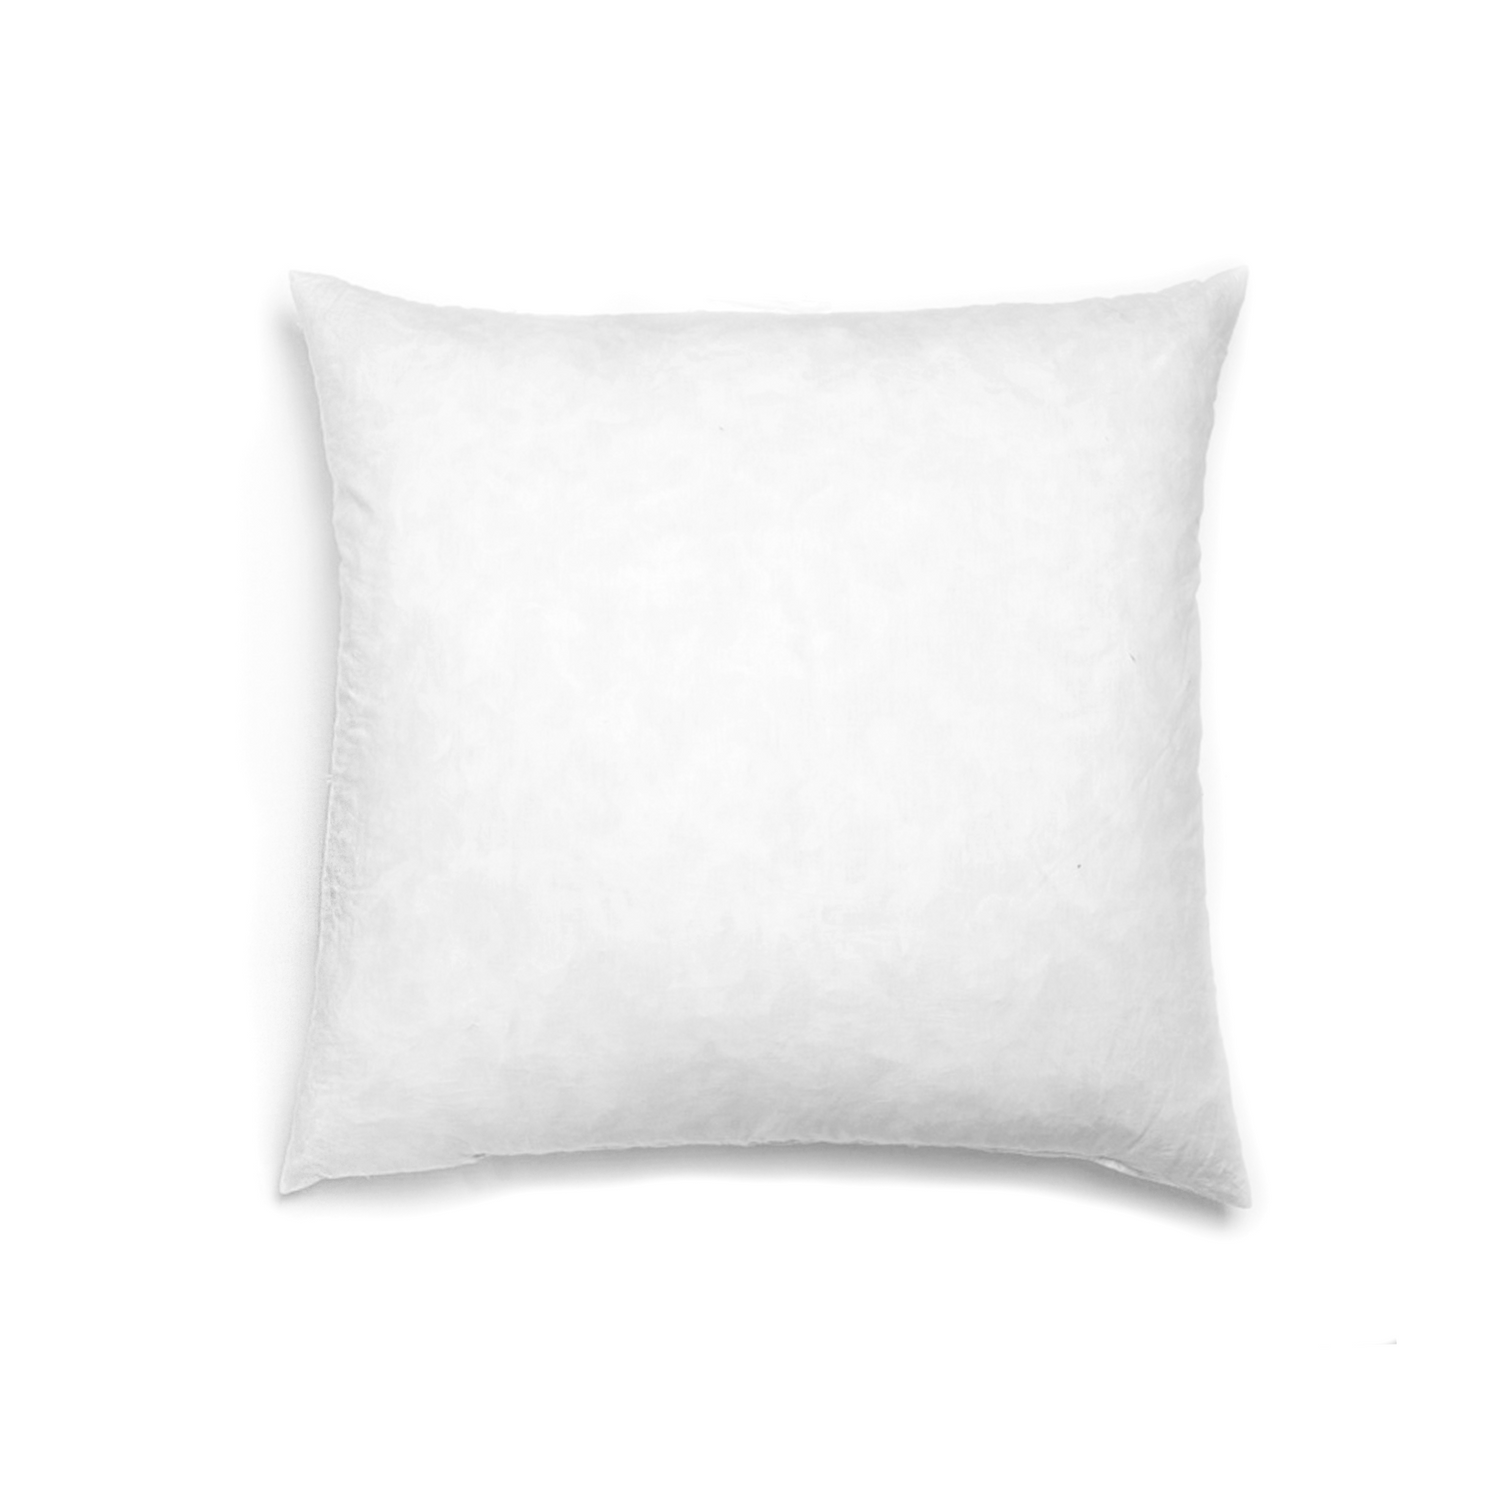 Throw Pillows Insert - Single Pillow 18 x 18 Inches for Bed and